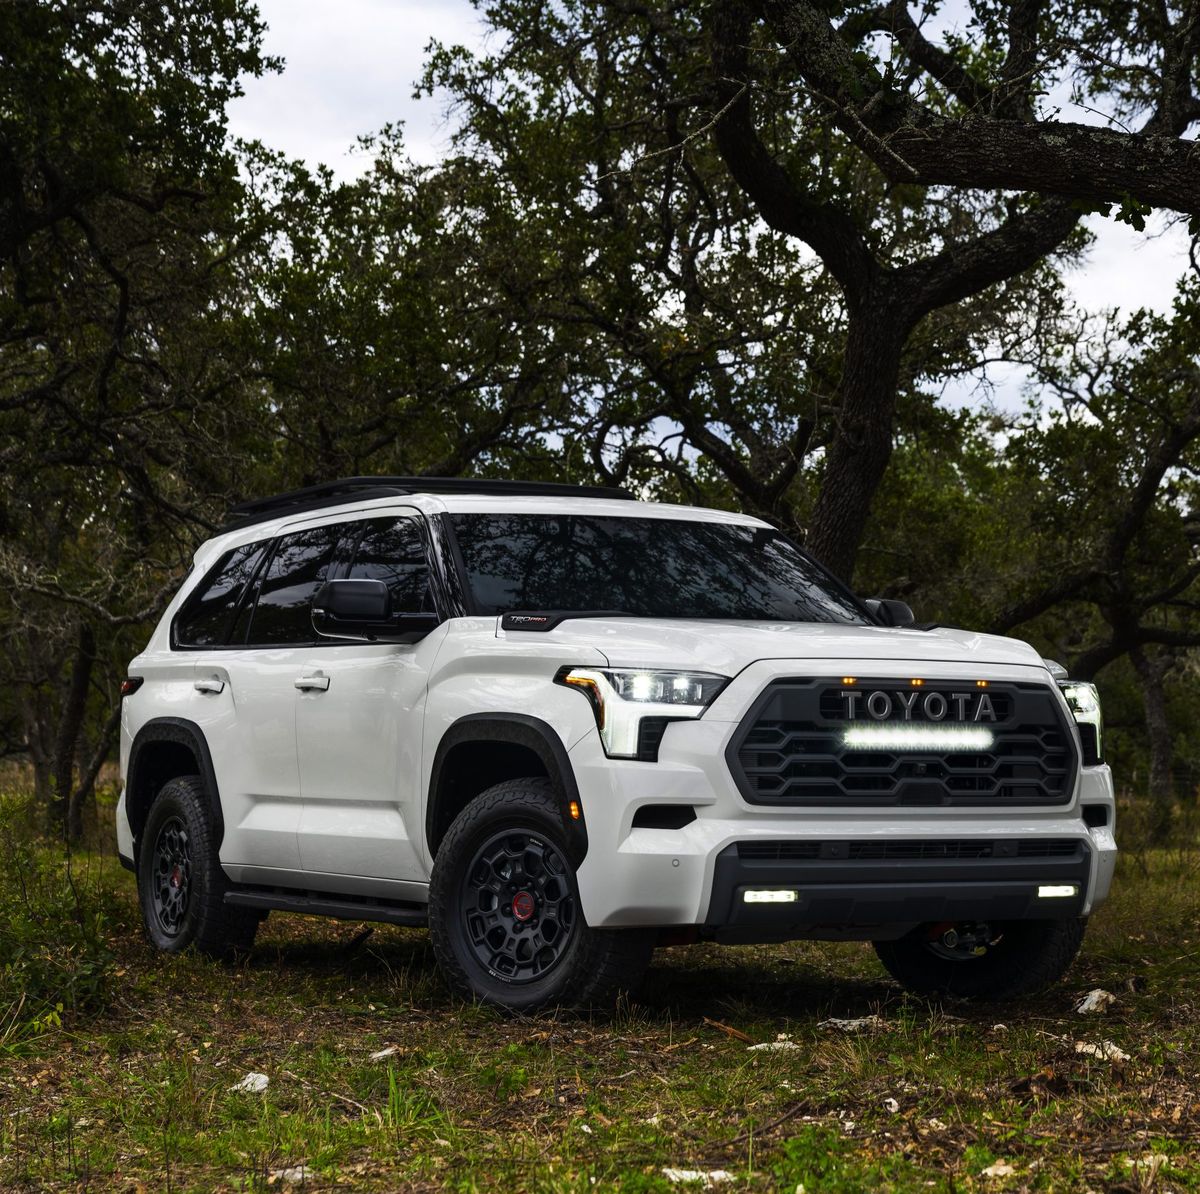 2023 Toyota Sequoia: Everything You Need to Know